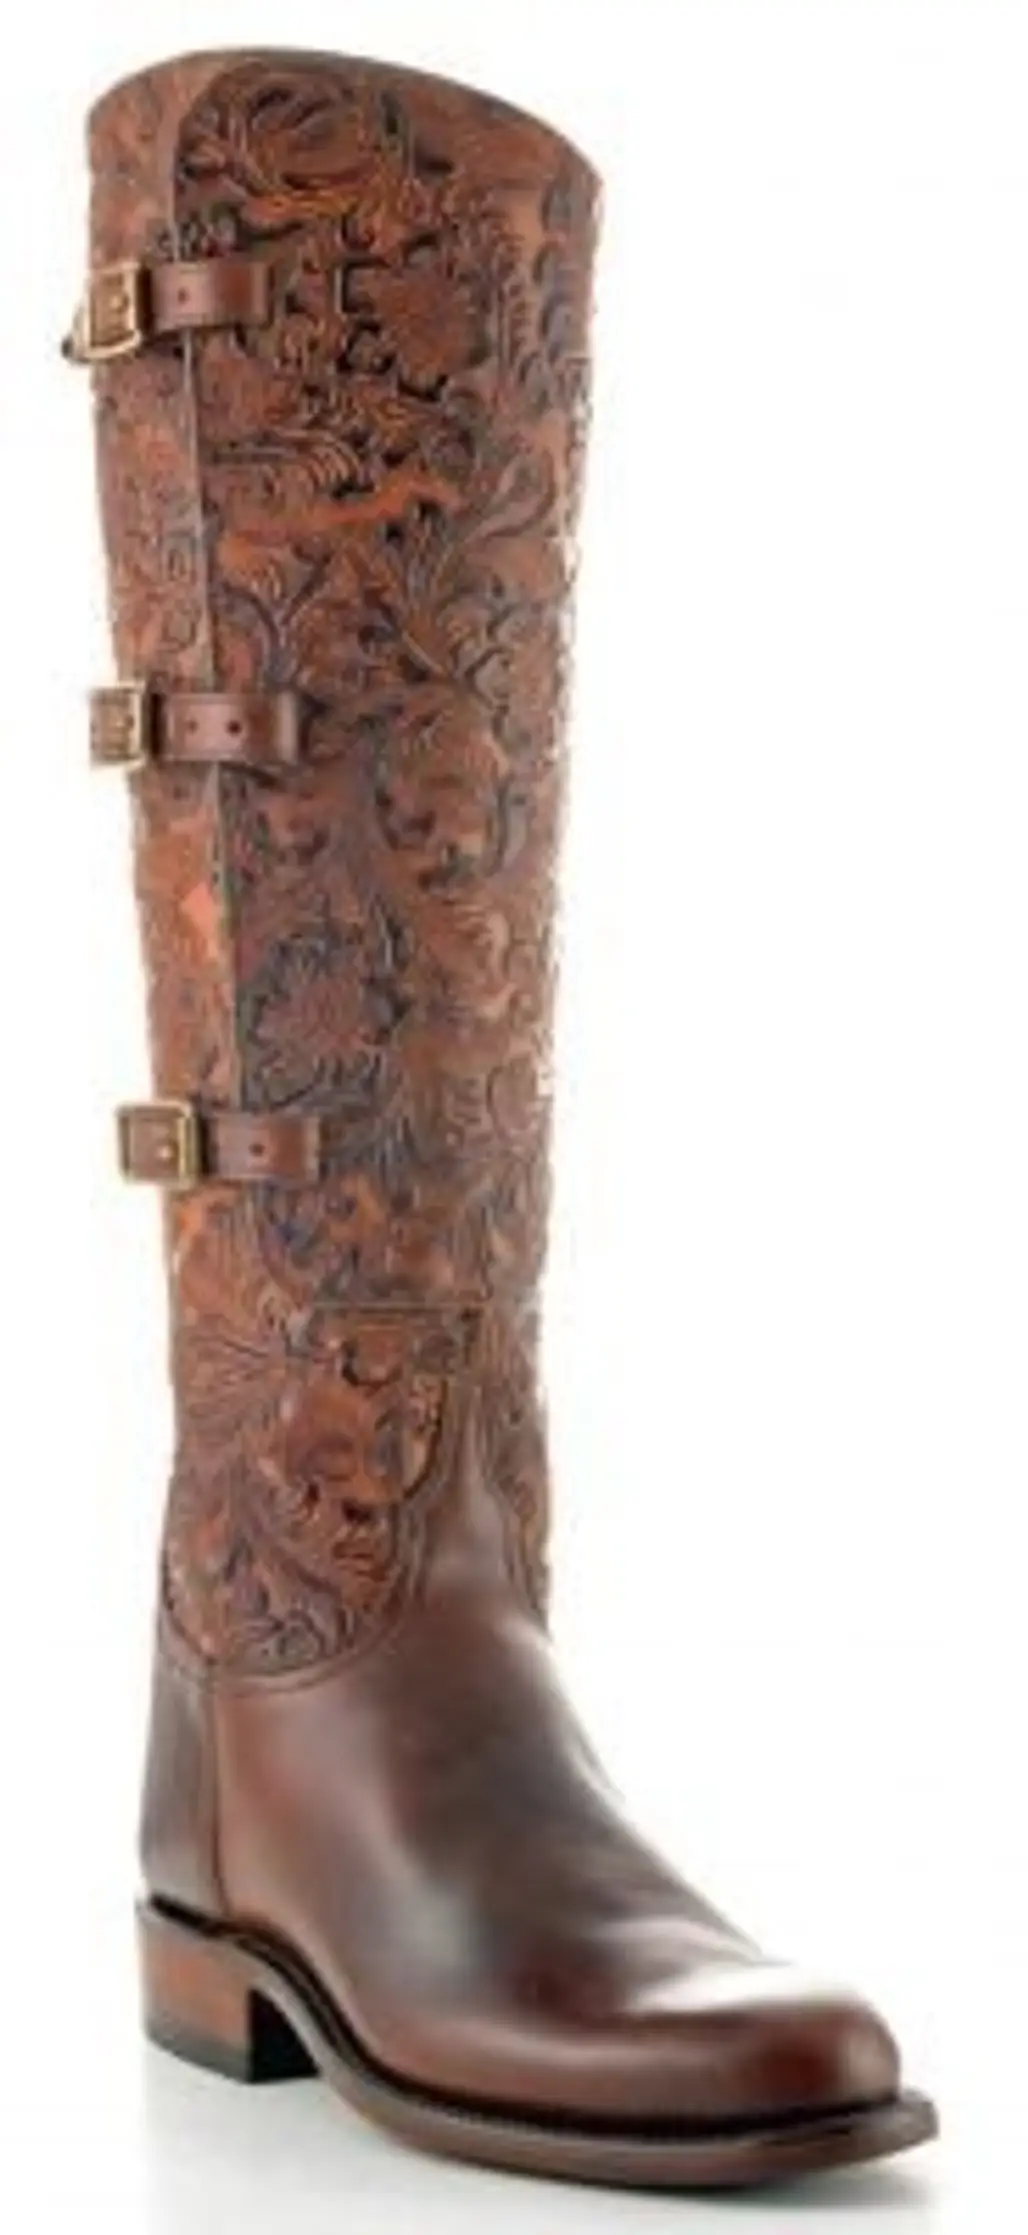 boot,footwear,brown,riding boot,cowboy boot,